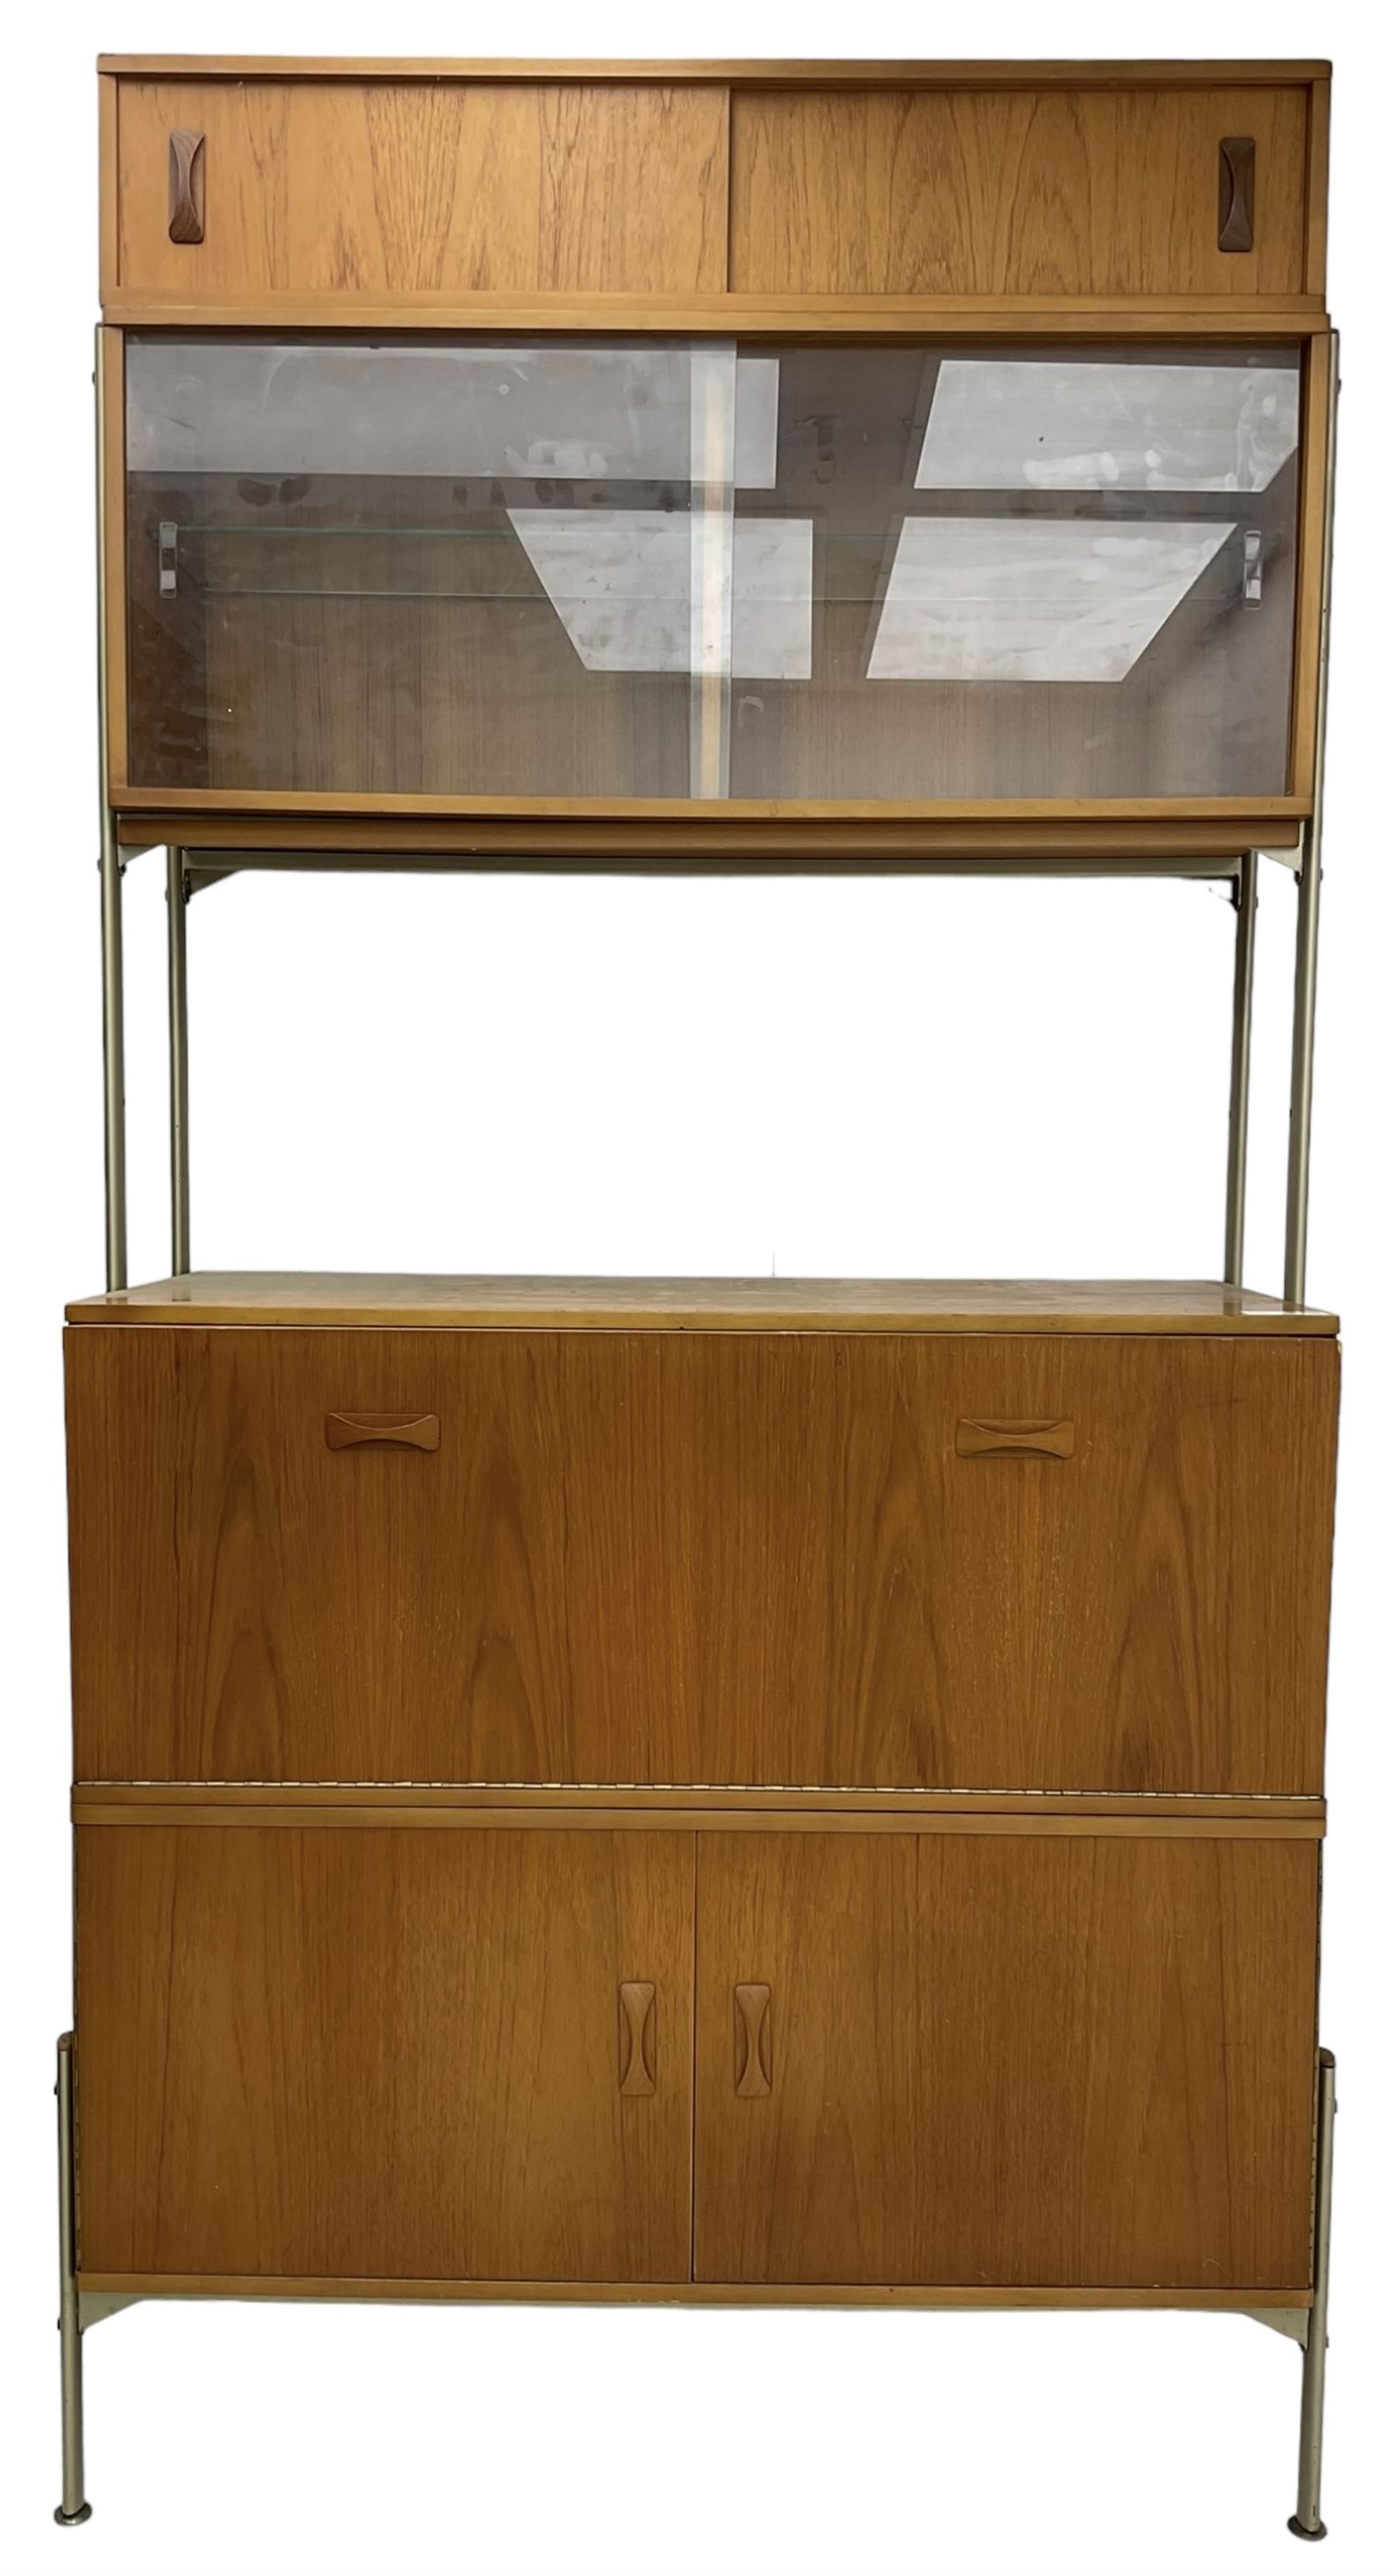 Remploy - mid-20th century teak sectional wall display unit or room divider - Image 4 of 5